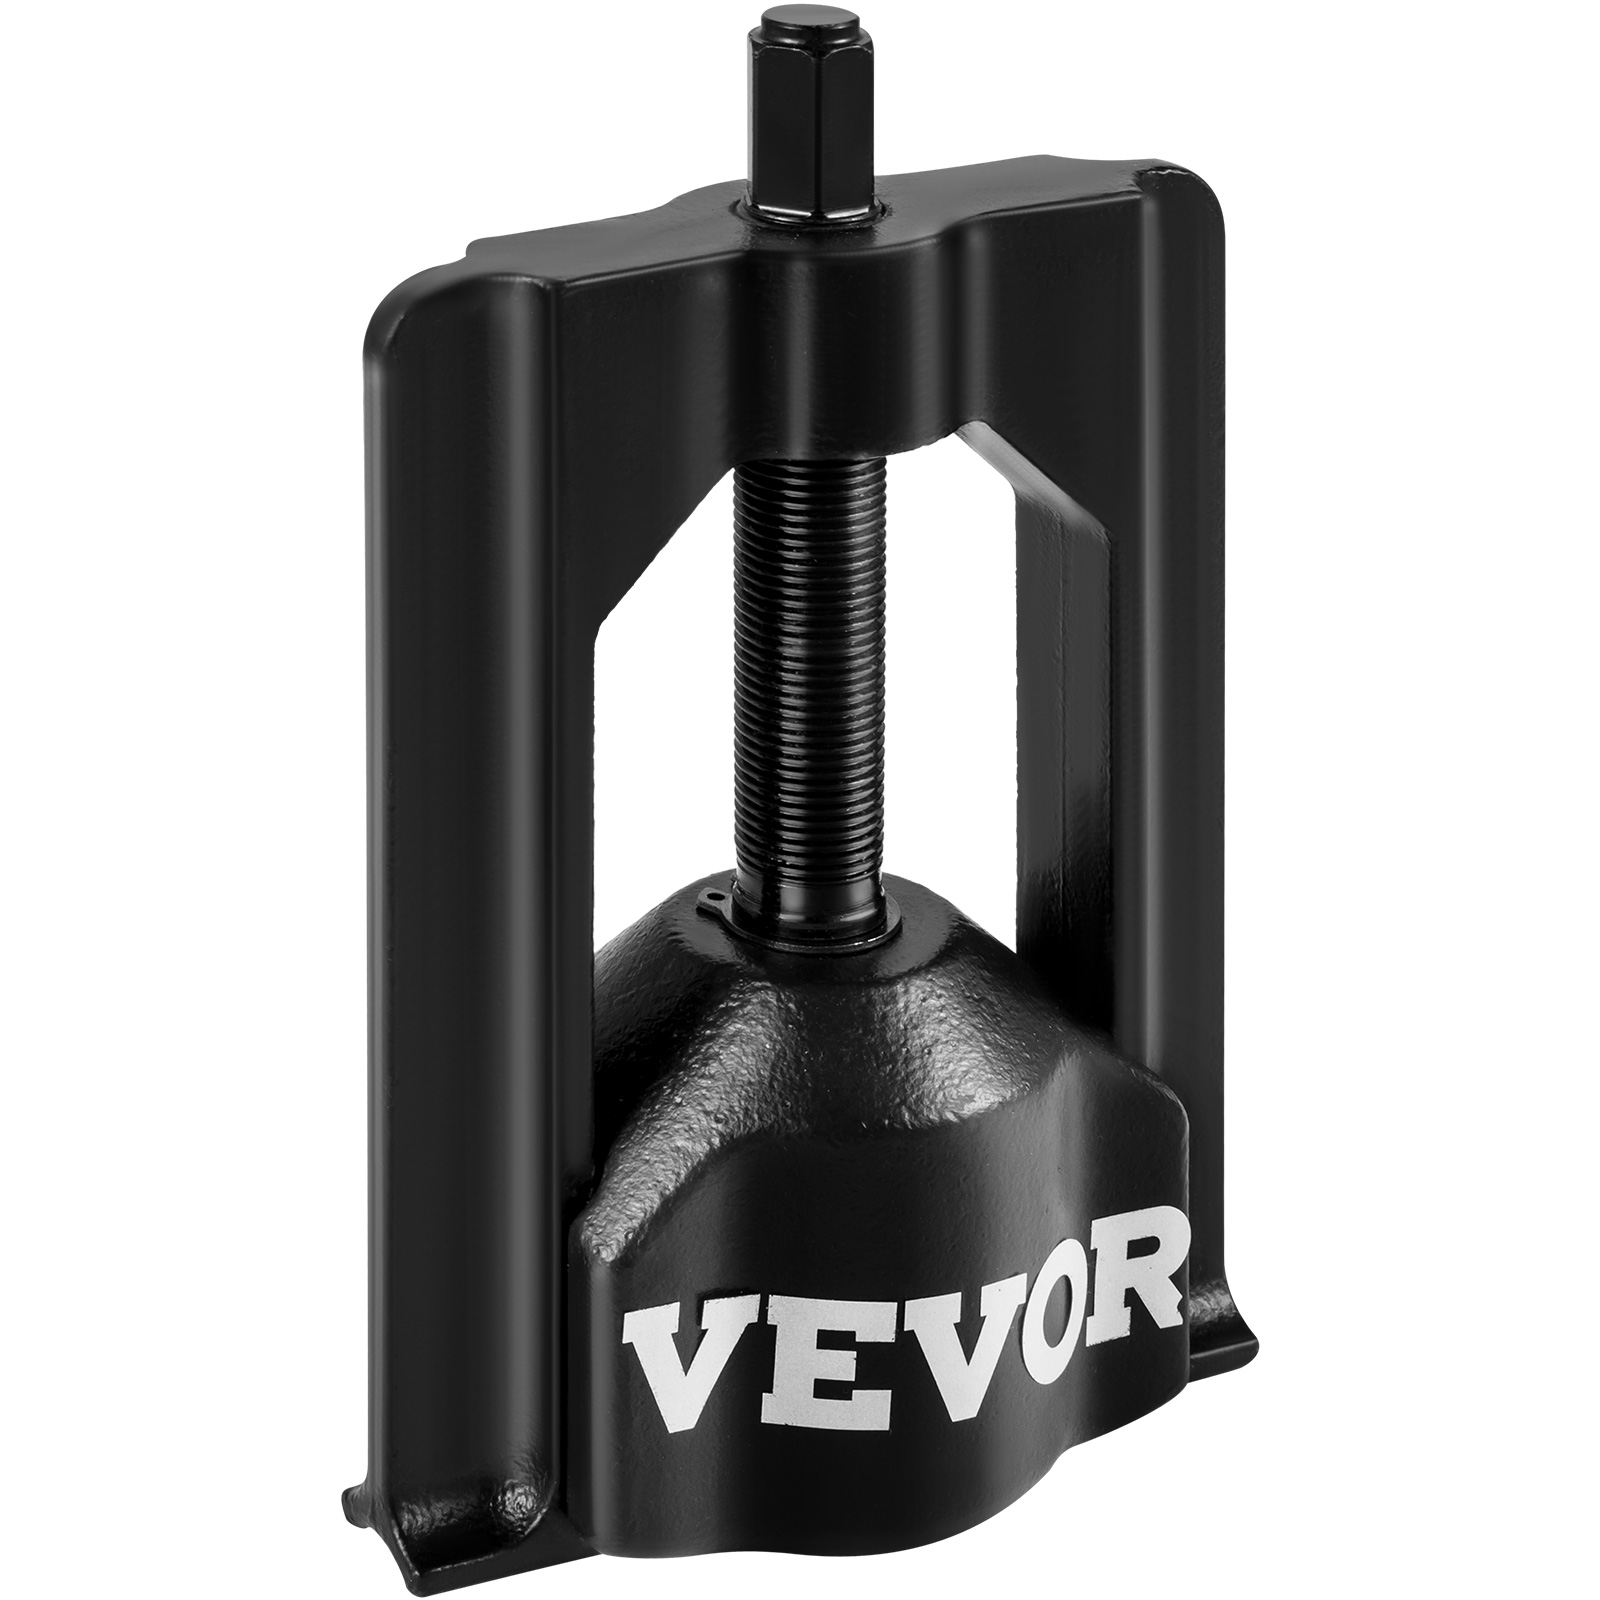 VEVOR Universal Joint Puller Class 4-6 Press Removal U-Joint Puller Tool Black от Vevor Many GEOs